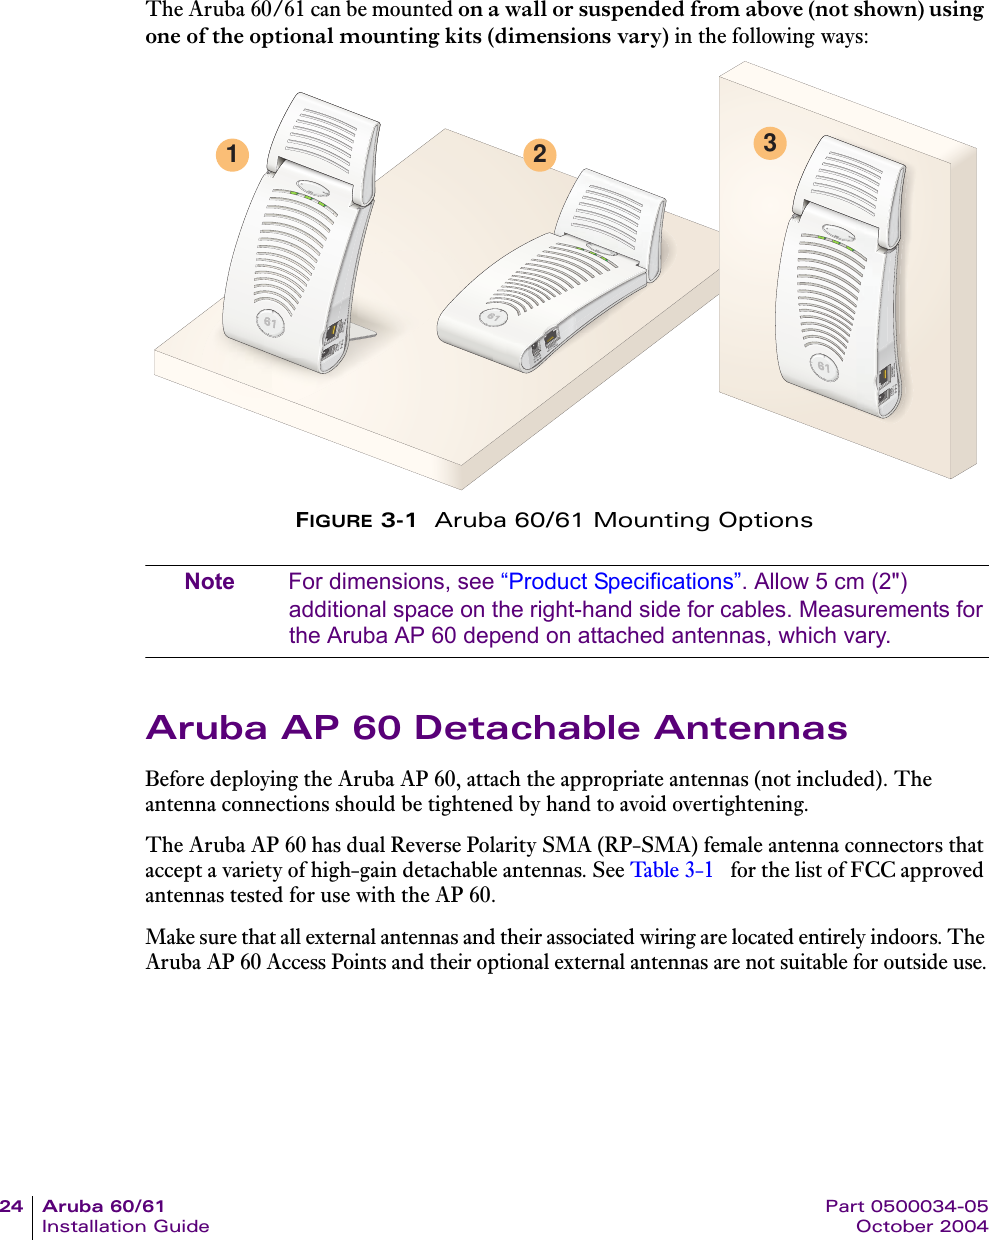 24 Aruba 60/61 Part 0500034-05Installation Guide October 2004The Aruba 60/61 can be mounted on a wall or suspended from above (not shown) using one of the optional mounting kits (dimensions vary) in the following ways:FIGURE 3-1  Aruba 60/61 Mounting OptionsNote For dimensions, see “Product Specifications”. Allow 5 cm (2&quot;) additional space on the right-hand side for cables. Measurements for the Aruba AP 60 depend on attached antennas, which vary.Aruba AP 60 Detachable AntennasBefore deploying the Aruba AP 60, attach the appropriate antennas (not included). The antenna connections should be tightened by hand to avoid overtightening.The Aruba AP 60 has dual Reverse Polarity SMA (RP-SMA) female antenna connectors that accept a variety of high-gain detachable antennas. See Ta ble 3-1  for the list of FCC approved antennas tested for use with the AP 60.Make sure that all external antennas and their associated wiring are located entirely indoors. The Aruba AP 60 Access Points and their optional external antennas are not suitable for outside use.1 2 3